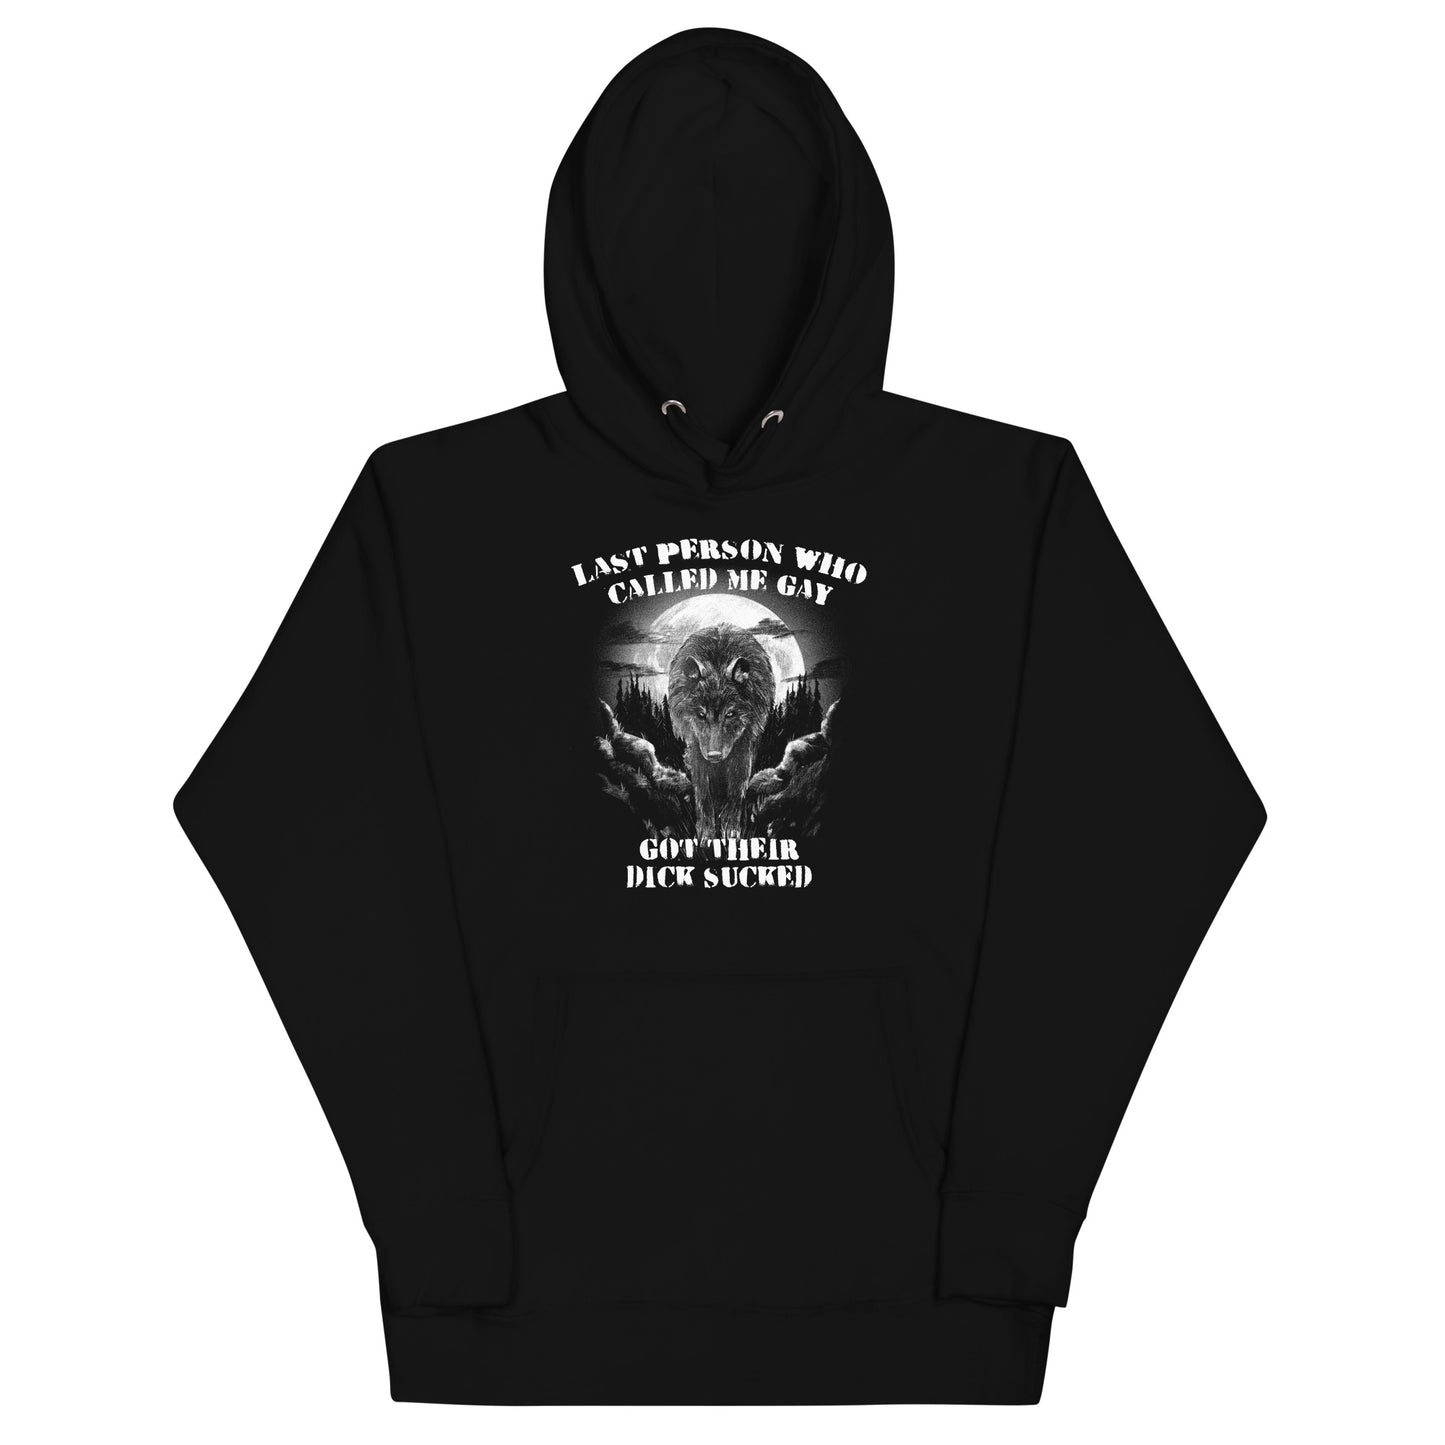 Last Person Who Called Me Gay Got Their Dick Sucked Unisex Hoodie